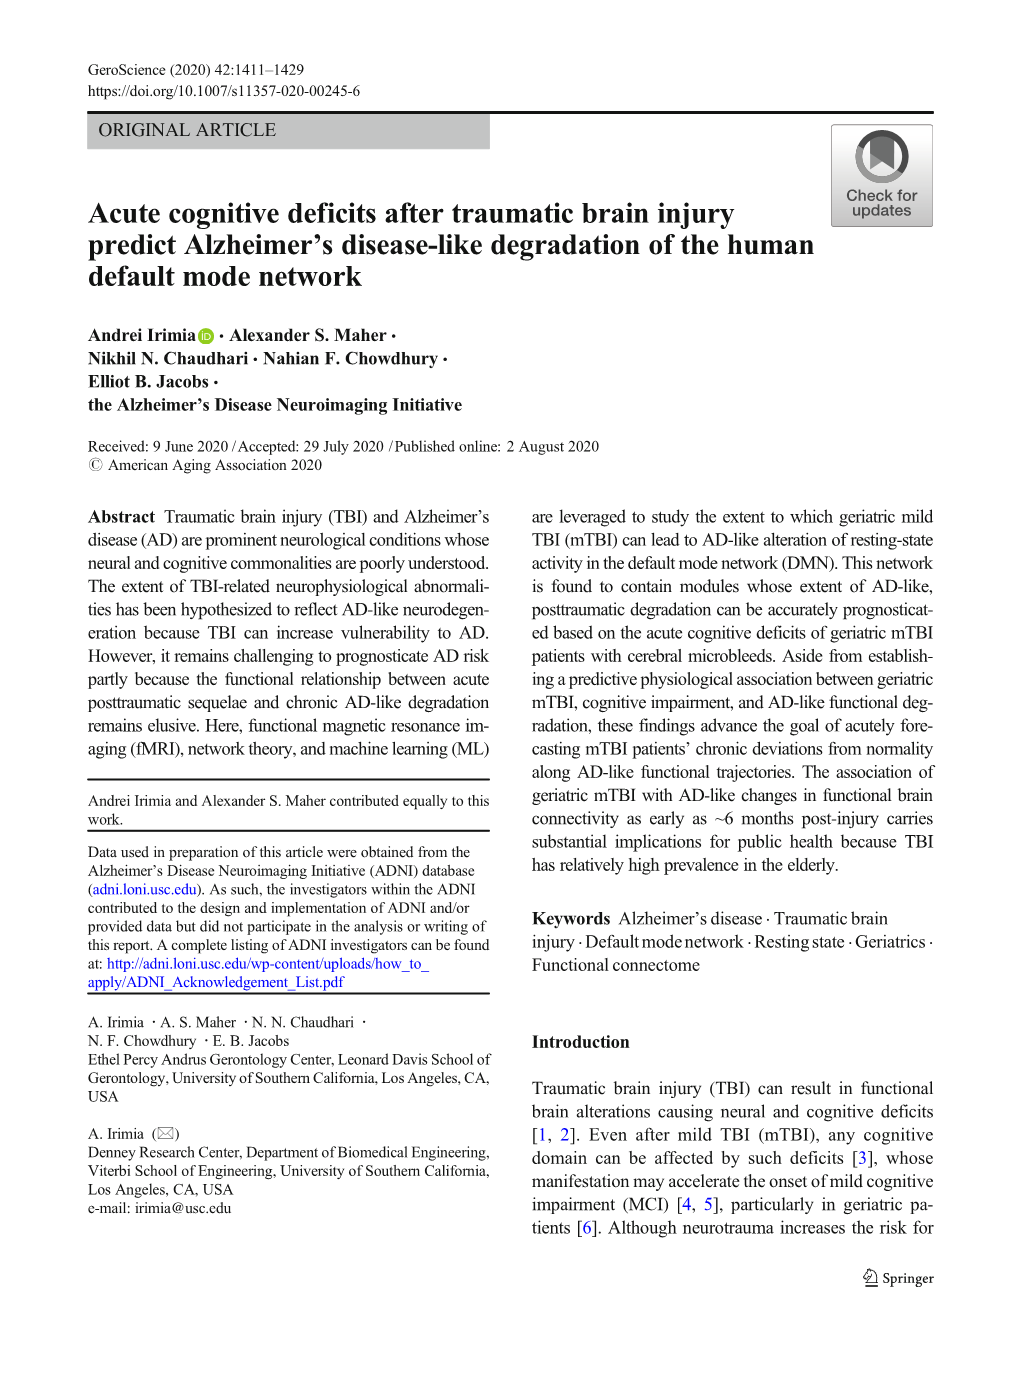 Acute Cognitive Deficits After Traumatic Brain Injury Predict Alzheimer's